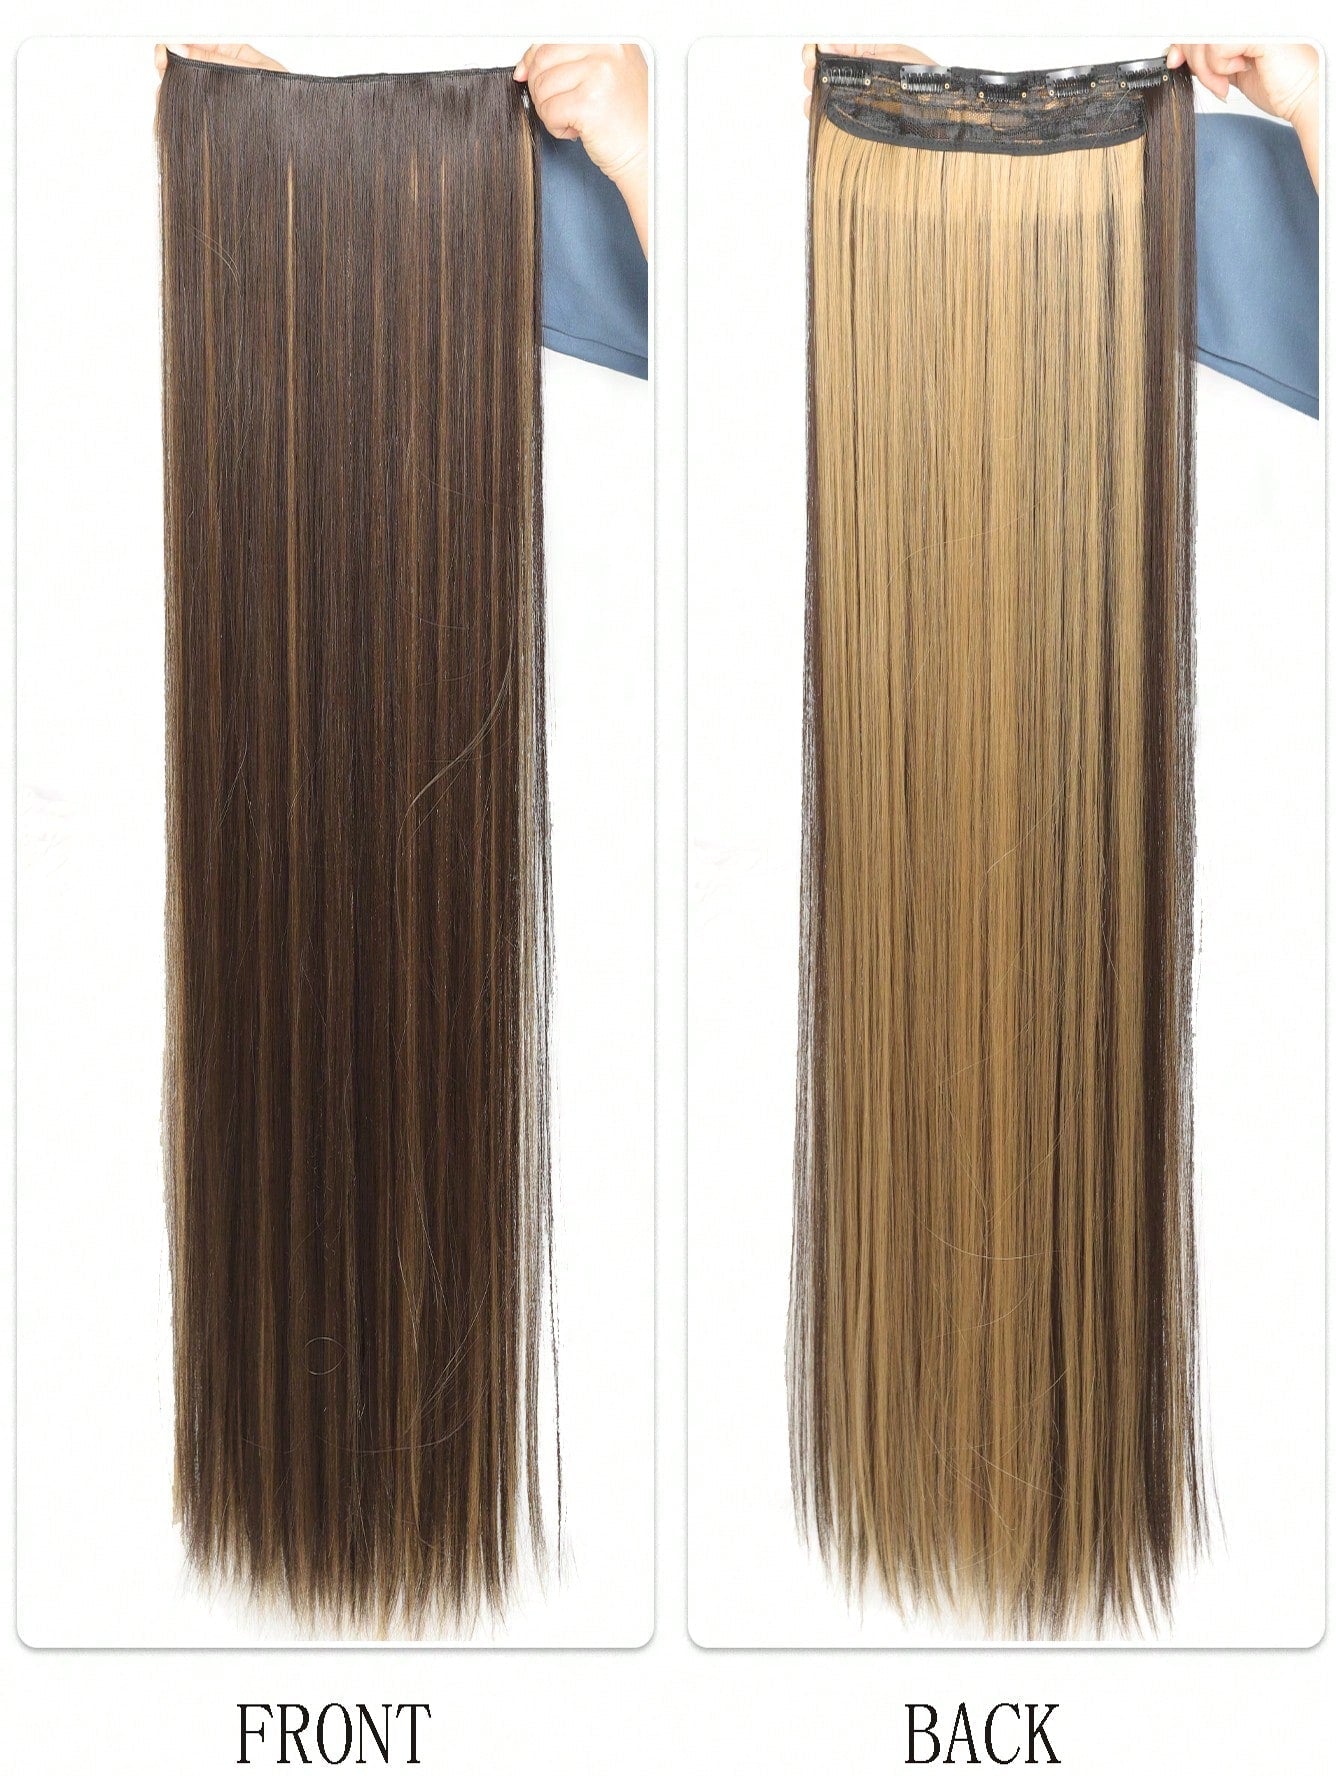 Clip In Hair Extensions 20-40 Inch Extra long Straight Brown Mixed Blonde Fake Hairpiece 5 Clips Synthetic Hair Extensions For Women Daily Use - Negative Apparel